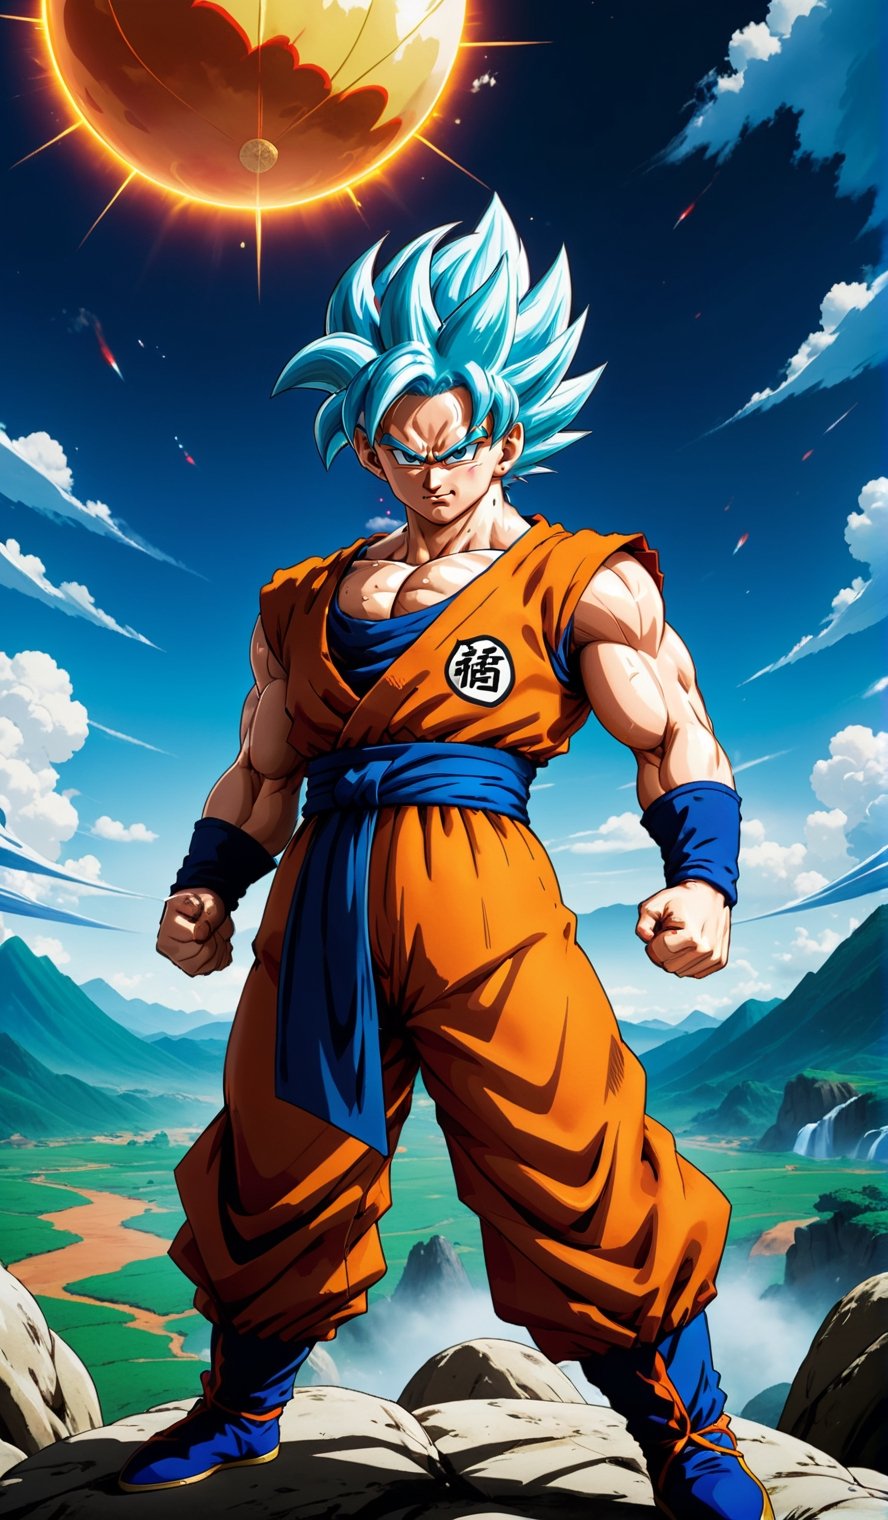 ((Cover art in 4K resolution, Dragon Ball-inspired style, with sharp details, vibrant colors and rich textures.)) | The central scene features the main Dragon Ball characters in dynamic poses and prepared for battle: Goku in his Super Saiyan 3 form, Vegeta as Super Saiyan 2, Gohan in his definitive form and Piccolo with the mantle of Earth God. They are standing on a rocky landscape, with clouds of Ki rising from the ground and forming a dramatic backdrop. In the background, a huge Genkidama lights up the sky, symbolizing the intensity of the epic battles in the game. | Around the main characters, small vignettes show other important characters from the Dragon Ball universe, such as Trunks, Goten, Frieza, Cell and Majin Buu. | Composition in dynamic perspective, with a low camera angle that highlights the majesty of the characters and the vastness of the scenery. | Dramatic lighting effects, shading and speed lines, highlighting the emotional nuances and battle atmosphere of the scene. | The thrilling cover of Dragon Ball Tenkaichi 3, bringing the anime's definitive battles to the player's screen. | ((perfect_composition, perfect_design, perfect_layout, perfect_detail, ultra_detailed)), More Detail, Enhance All